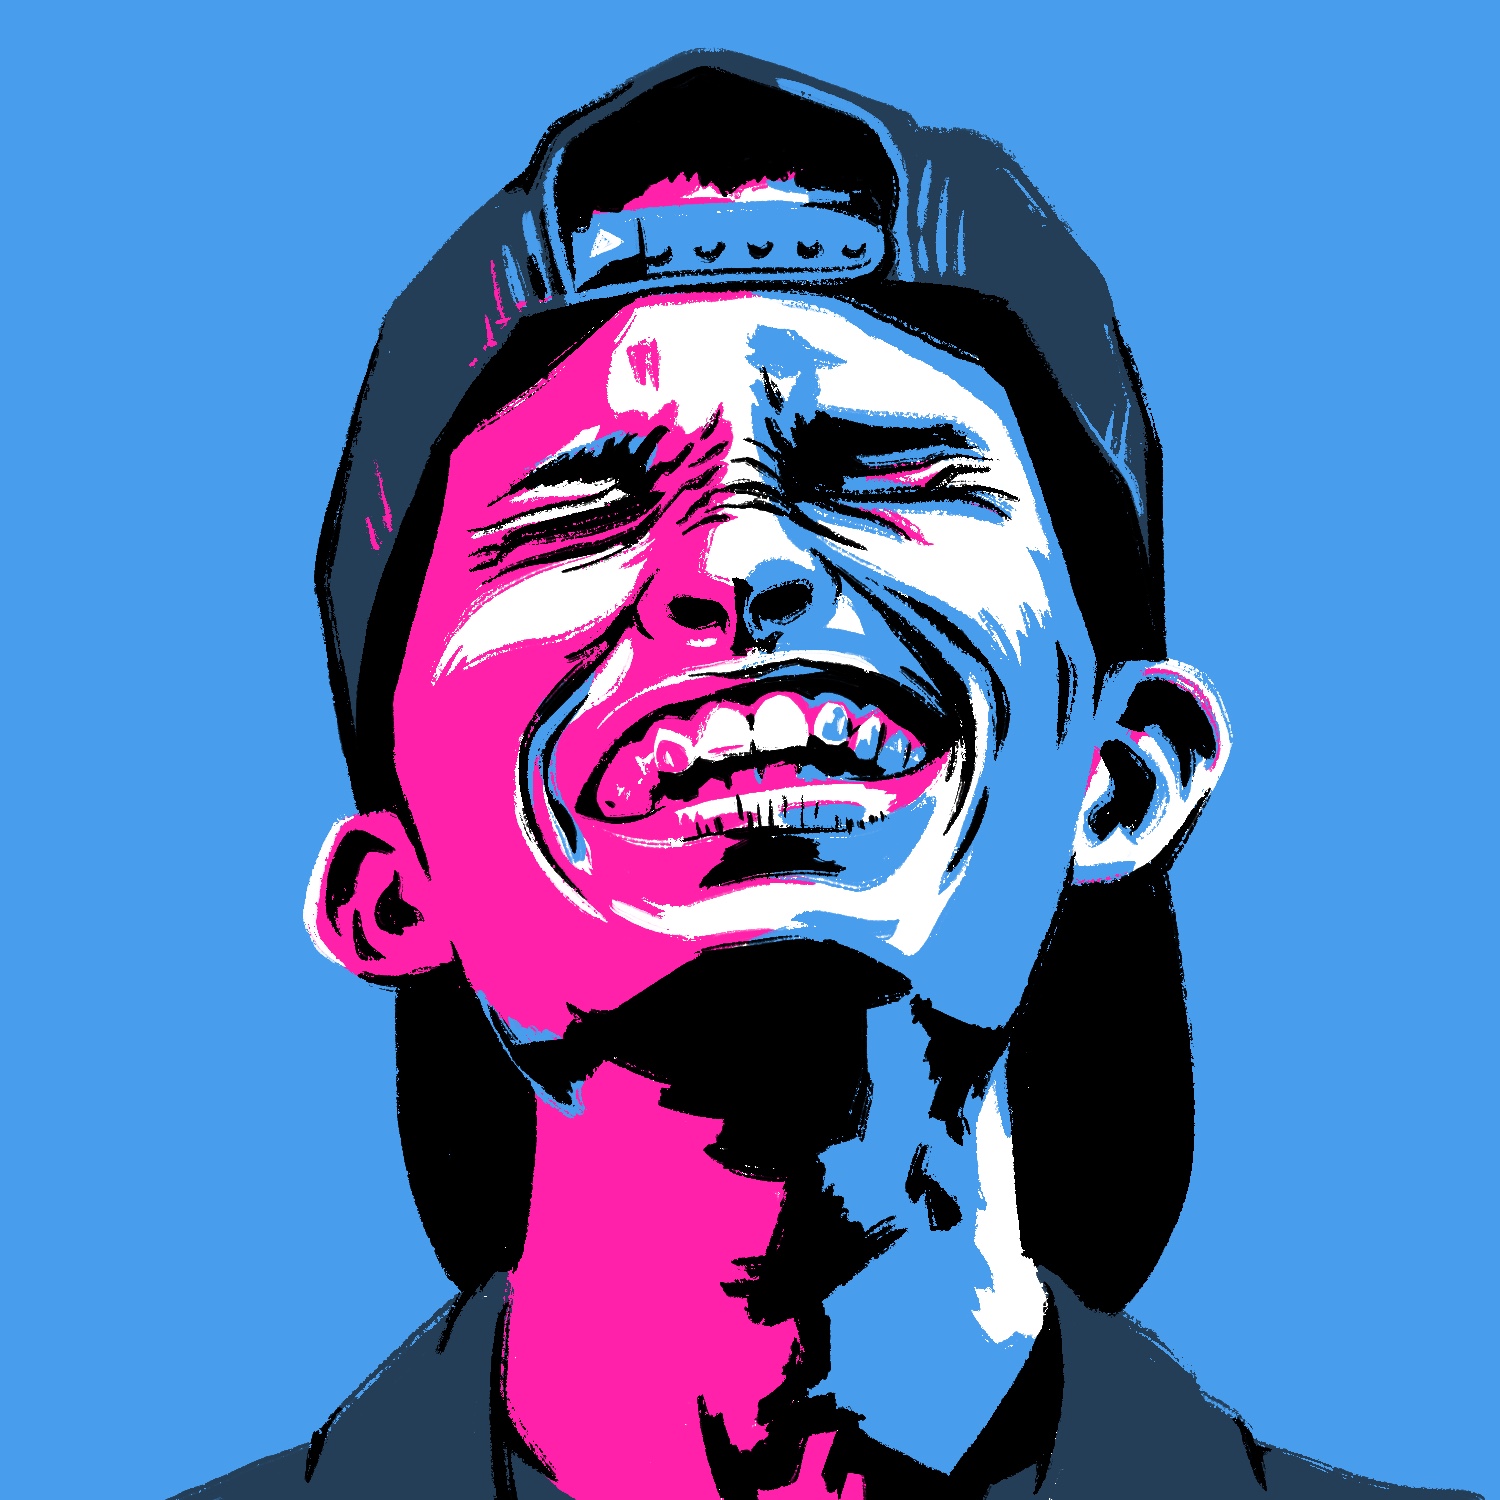 An illustration of a man laughing. The man is facing the viewer with his head tipped backward and his eyes are squinted tightly shut. His mouth is open. He almost looks like he could be wincing. He has a hat on backwards and a dark shirt, both of which are dark blue. He is lit with a harsh pink light on the left and a blue light on the right, with black and white shadows and highlights giving the drawing a posterized effect. The background is a flat blue.